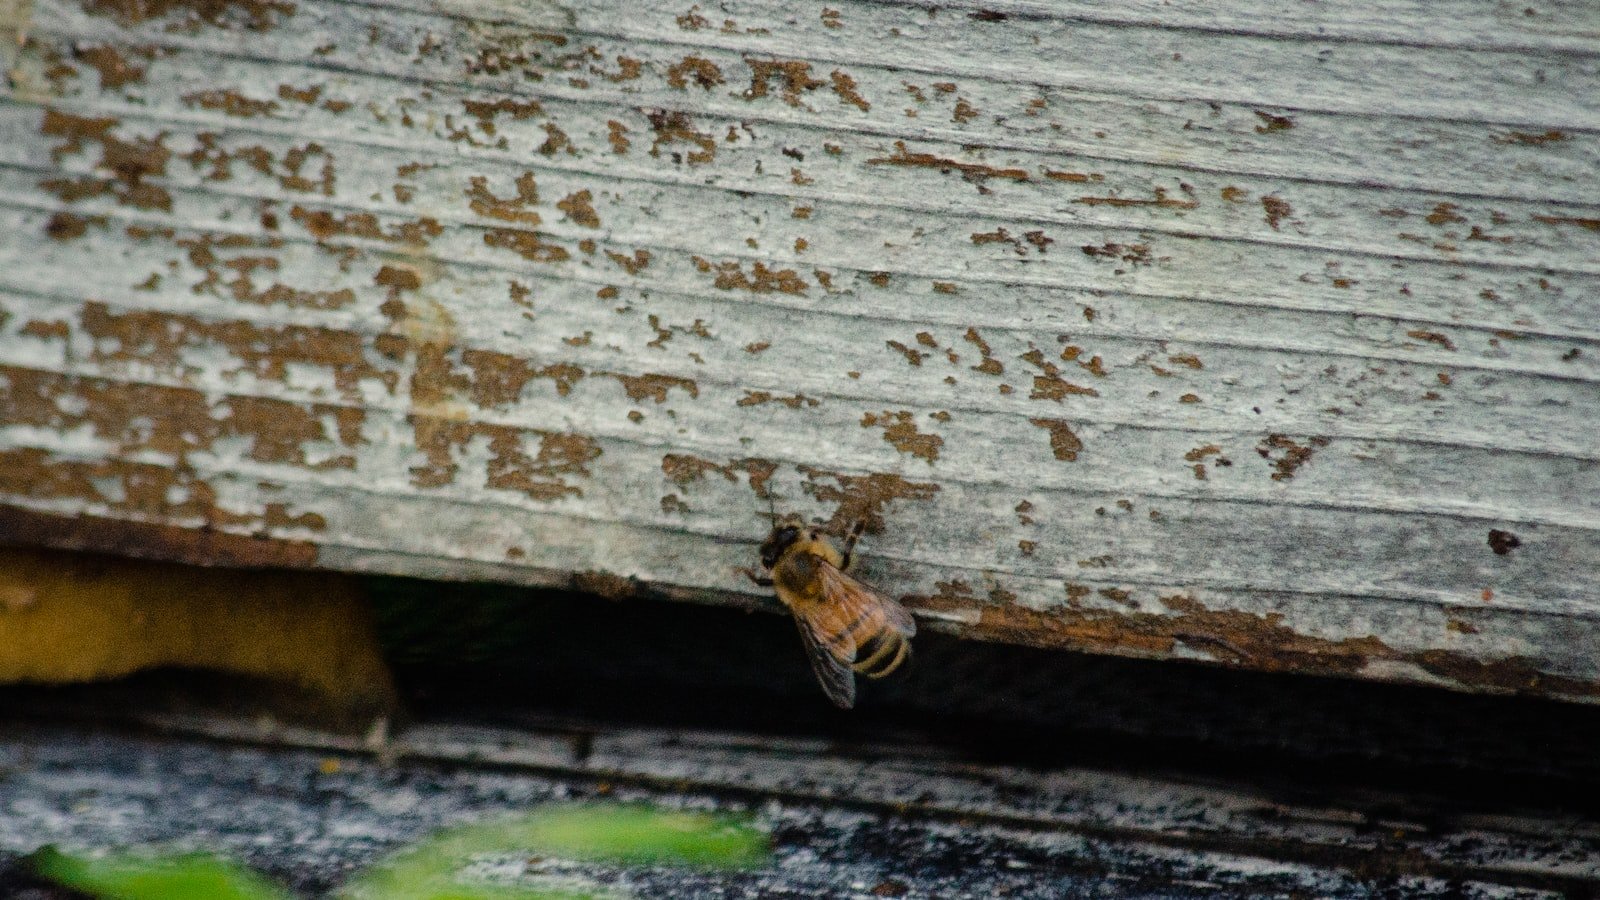 How to Comply with Endangered Species Laws in Beekeeping